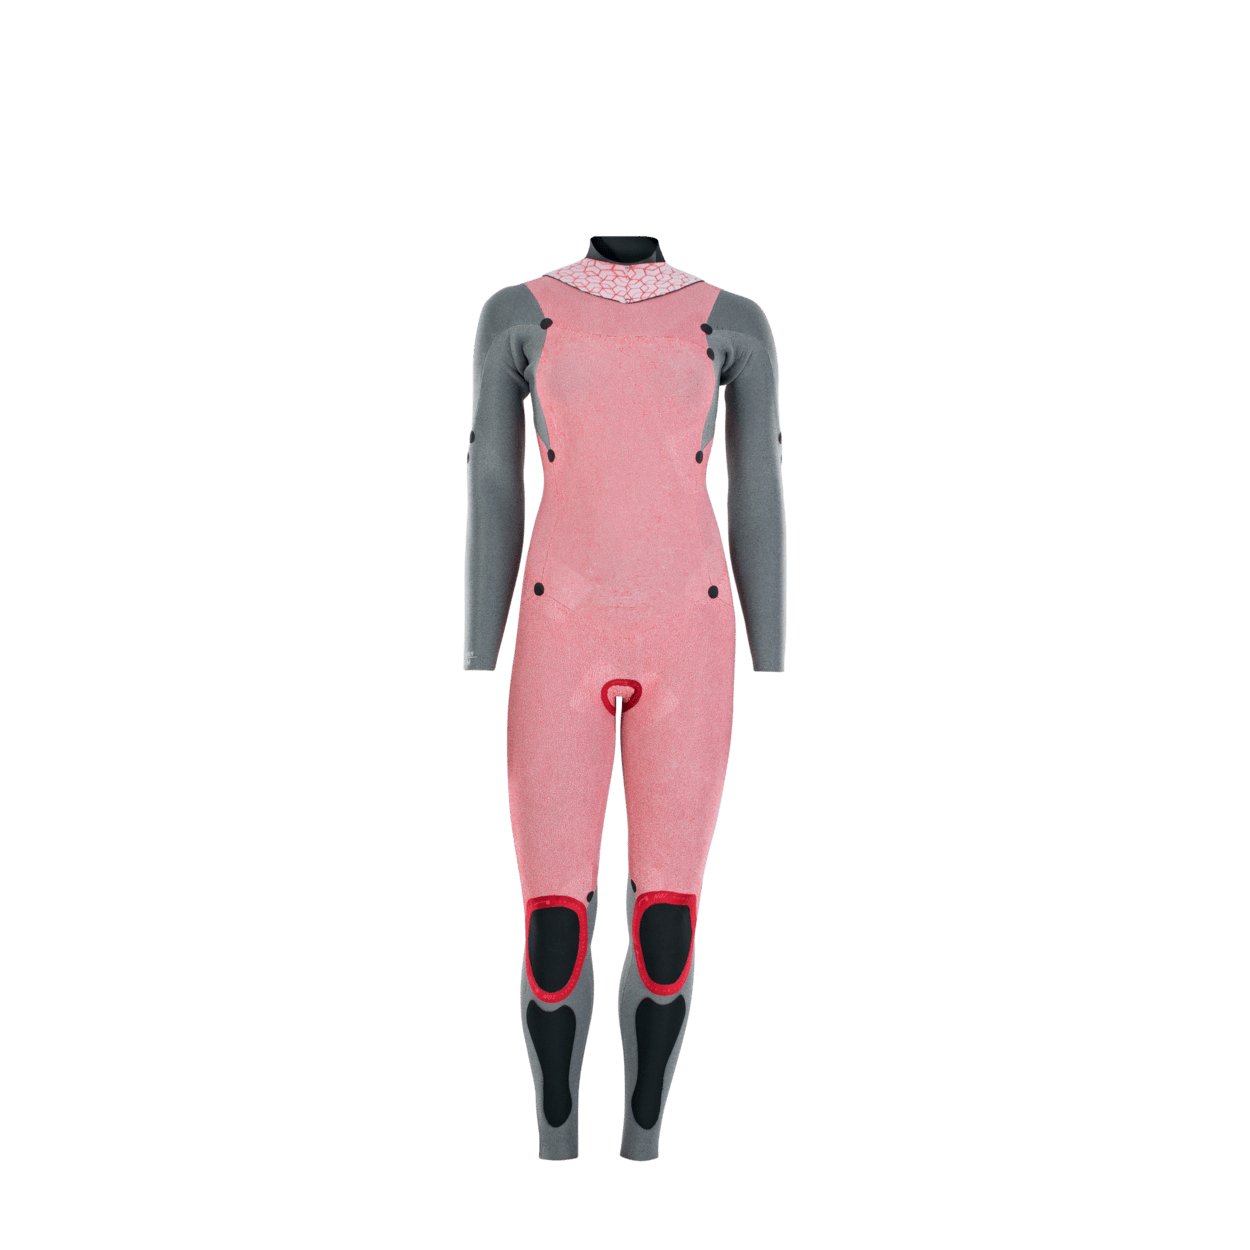 ION Women Wetsuit Amaze Core 5/4 Back Zip 2022 - Worthing Watersports - 9010583057569 - Wetsuits - ION Water